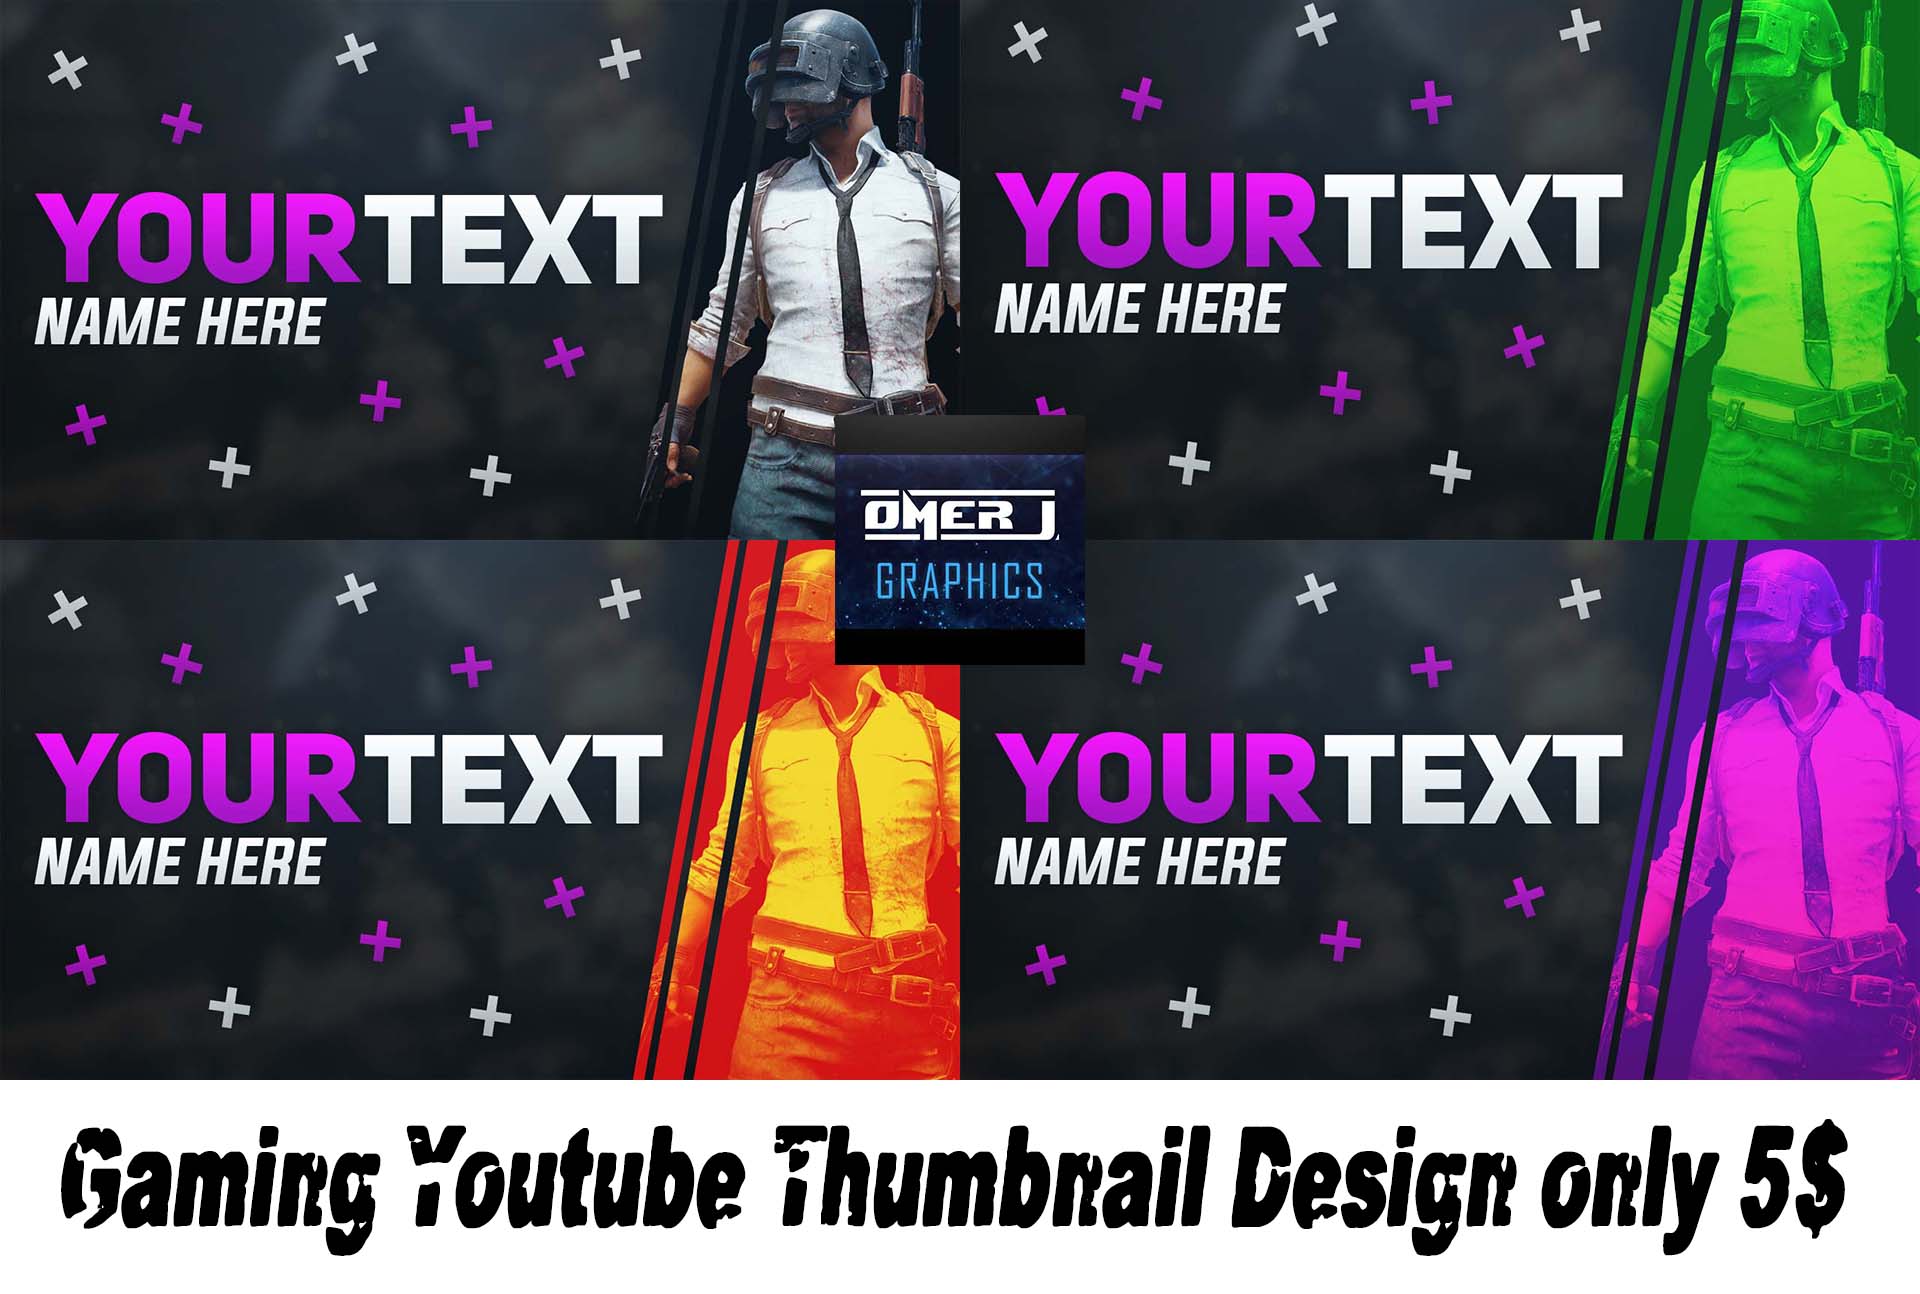 Create A Professional Gaming Youtube Thumbnail for $15 - SEOClerks